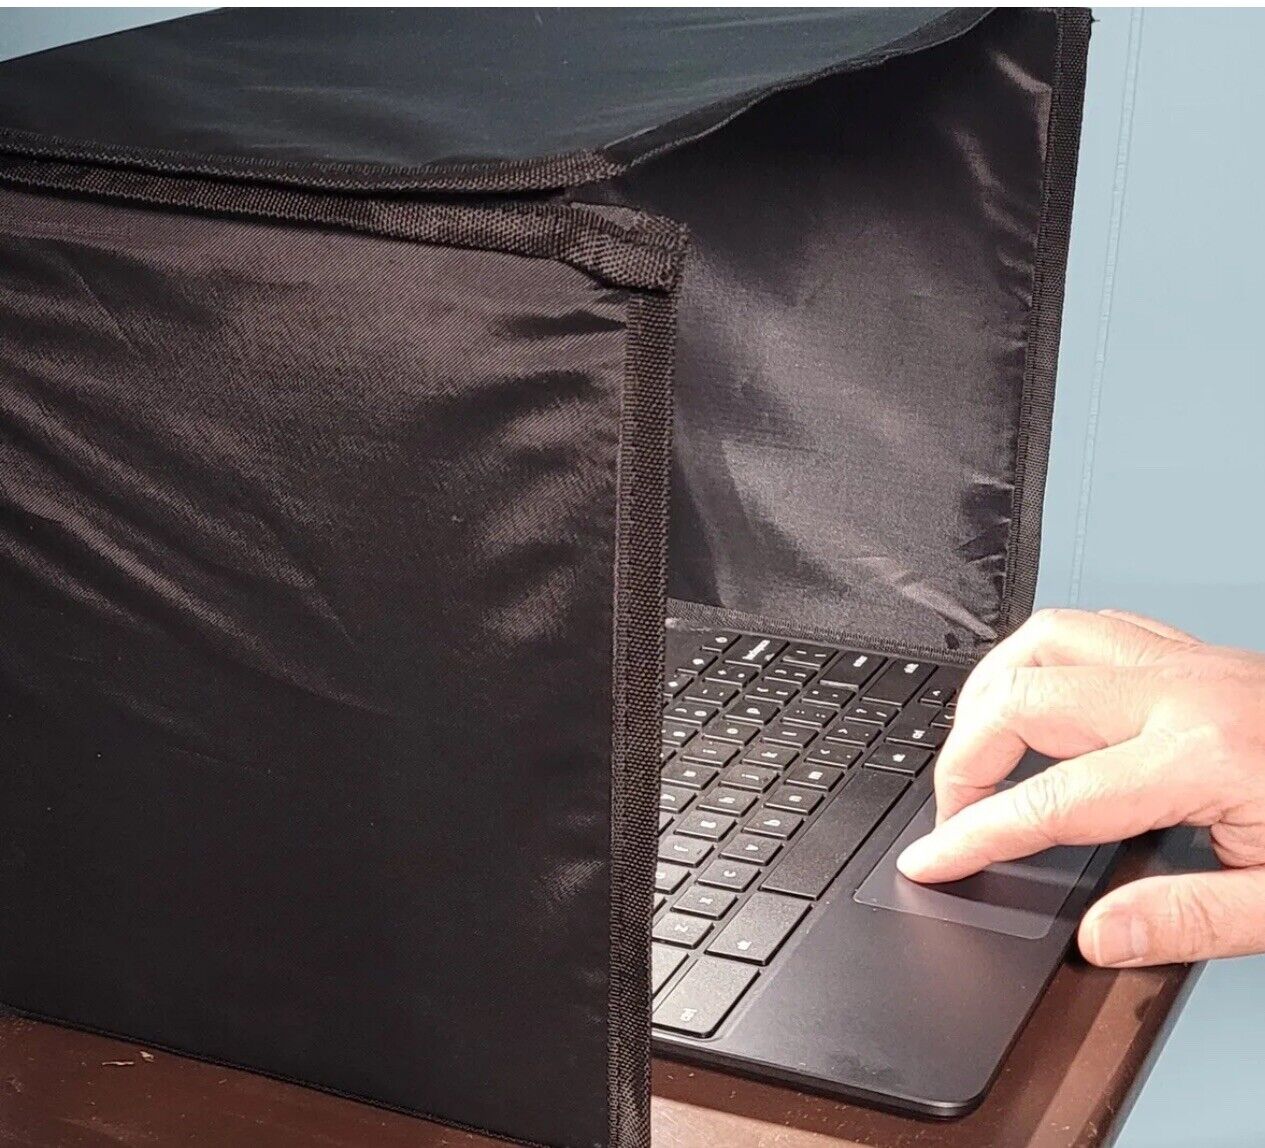 New Vivitar Laptop Sun + Shade Privacy-Fits up to 16" Folds Flat (Work Outside!)